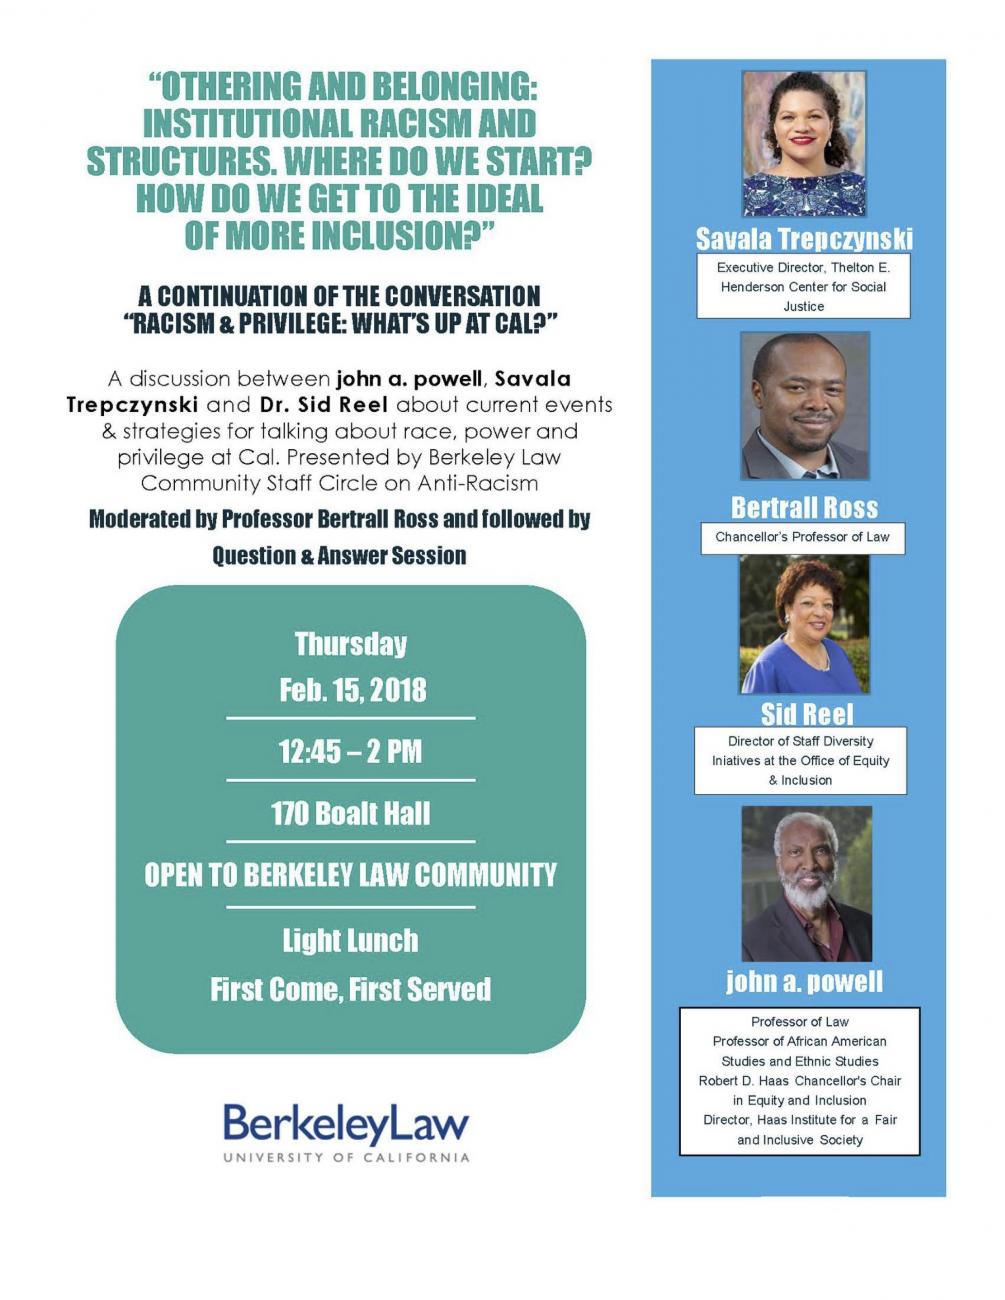 Image on john a. powell on Berkeley Law School Panel | Othering and Belonging: Institutional Racism and Structure